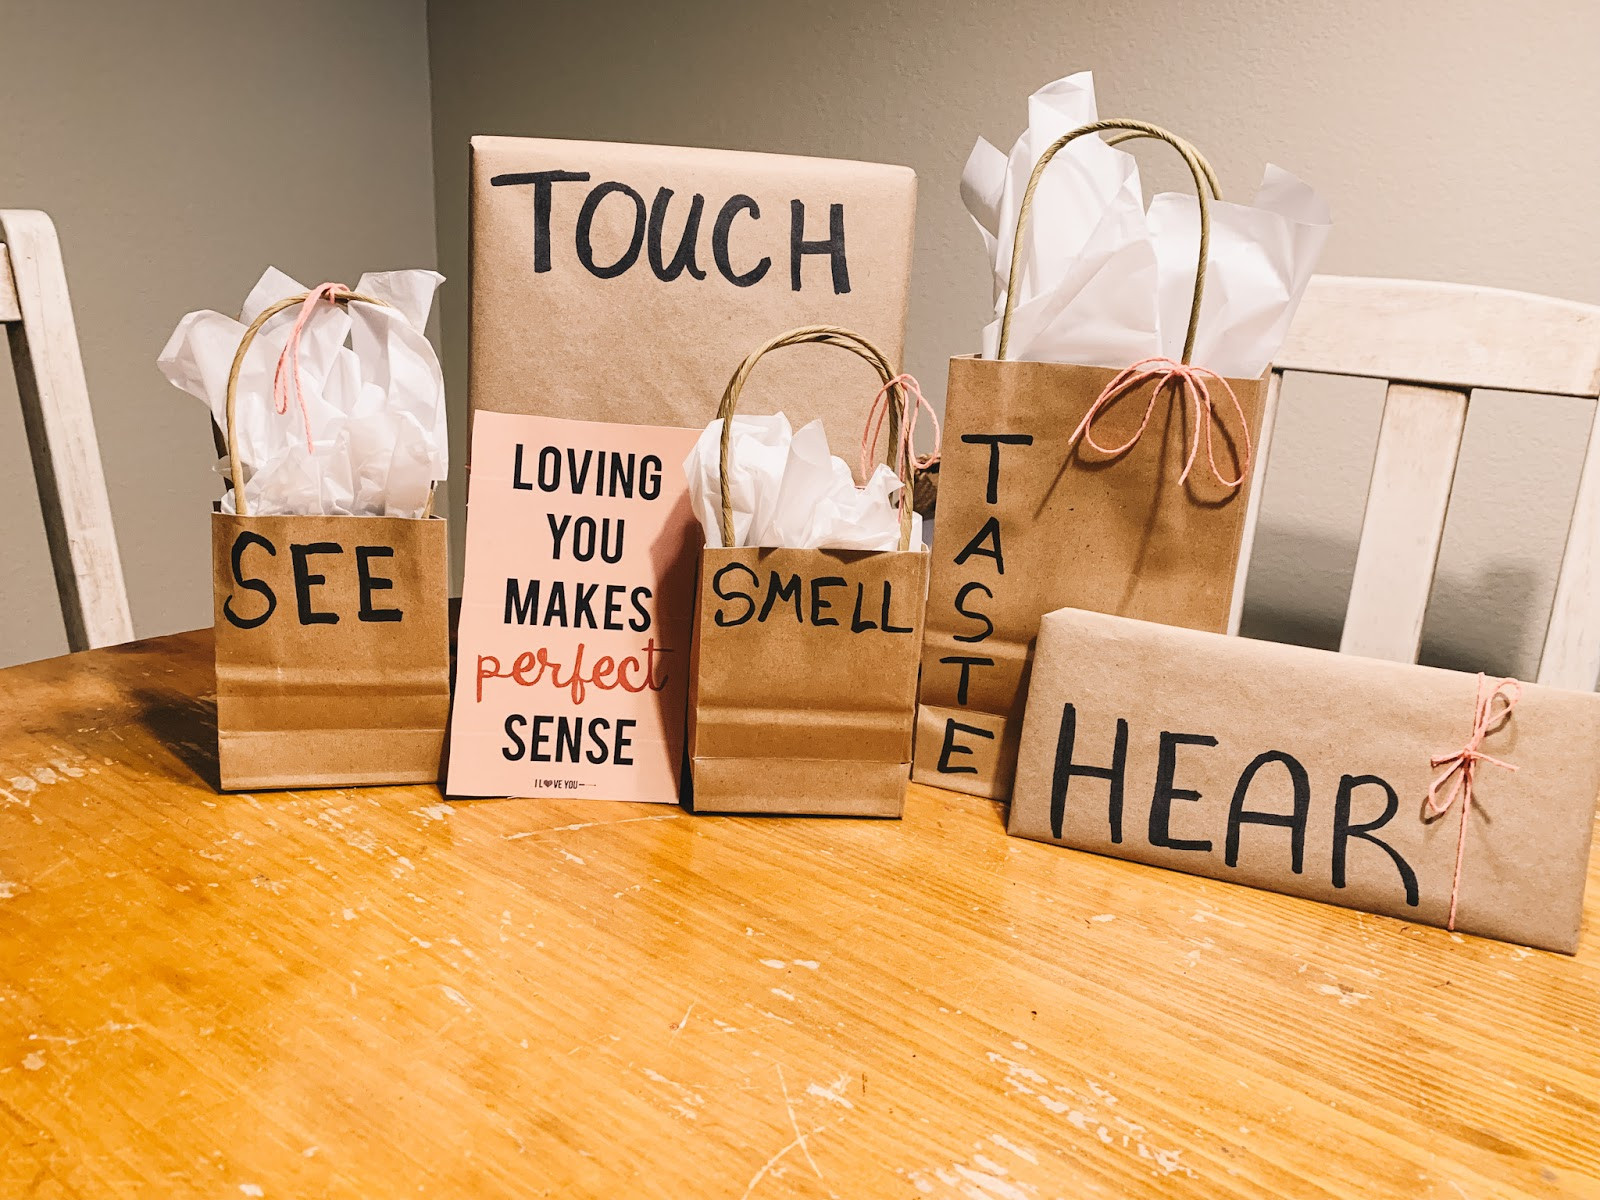 Gift Ideas For Valentines Day
 The 5 Senses Valentines Day Gift Ideas for Him & Her